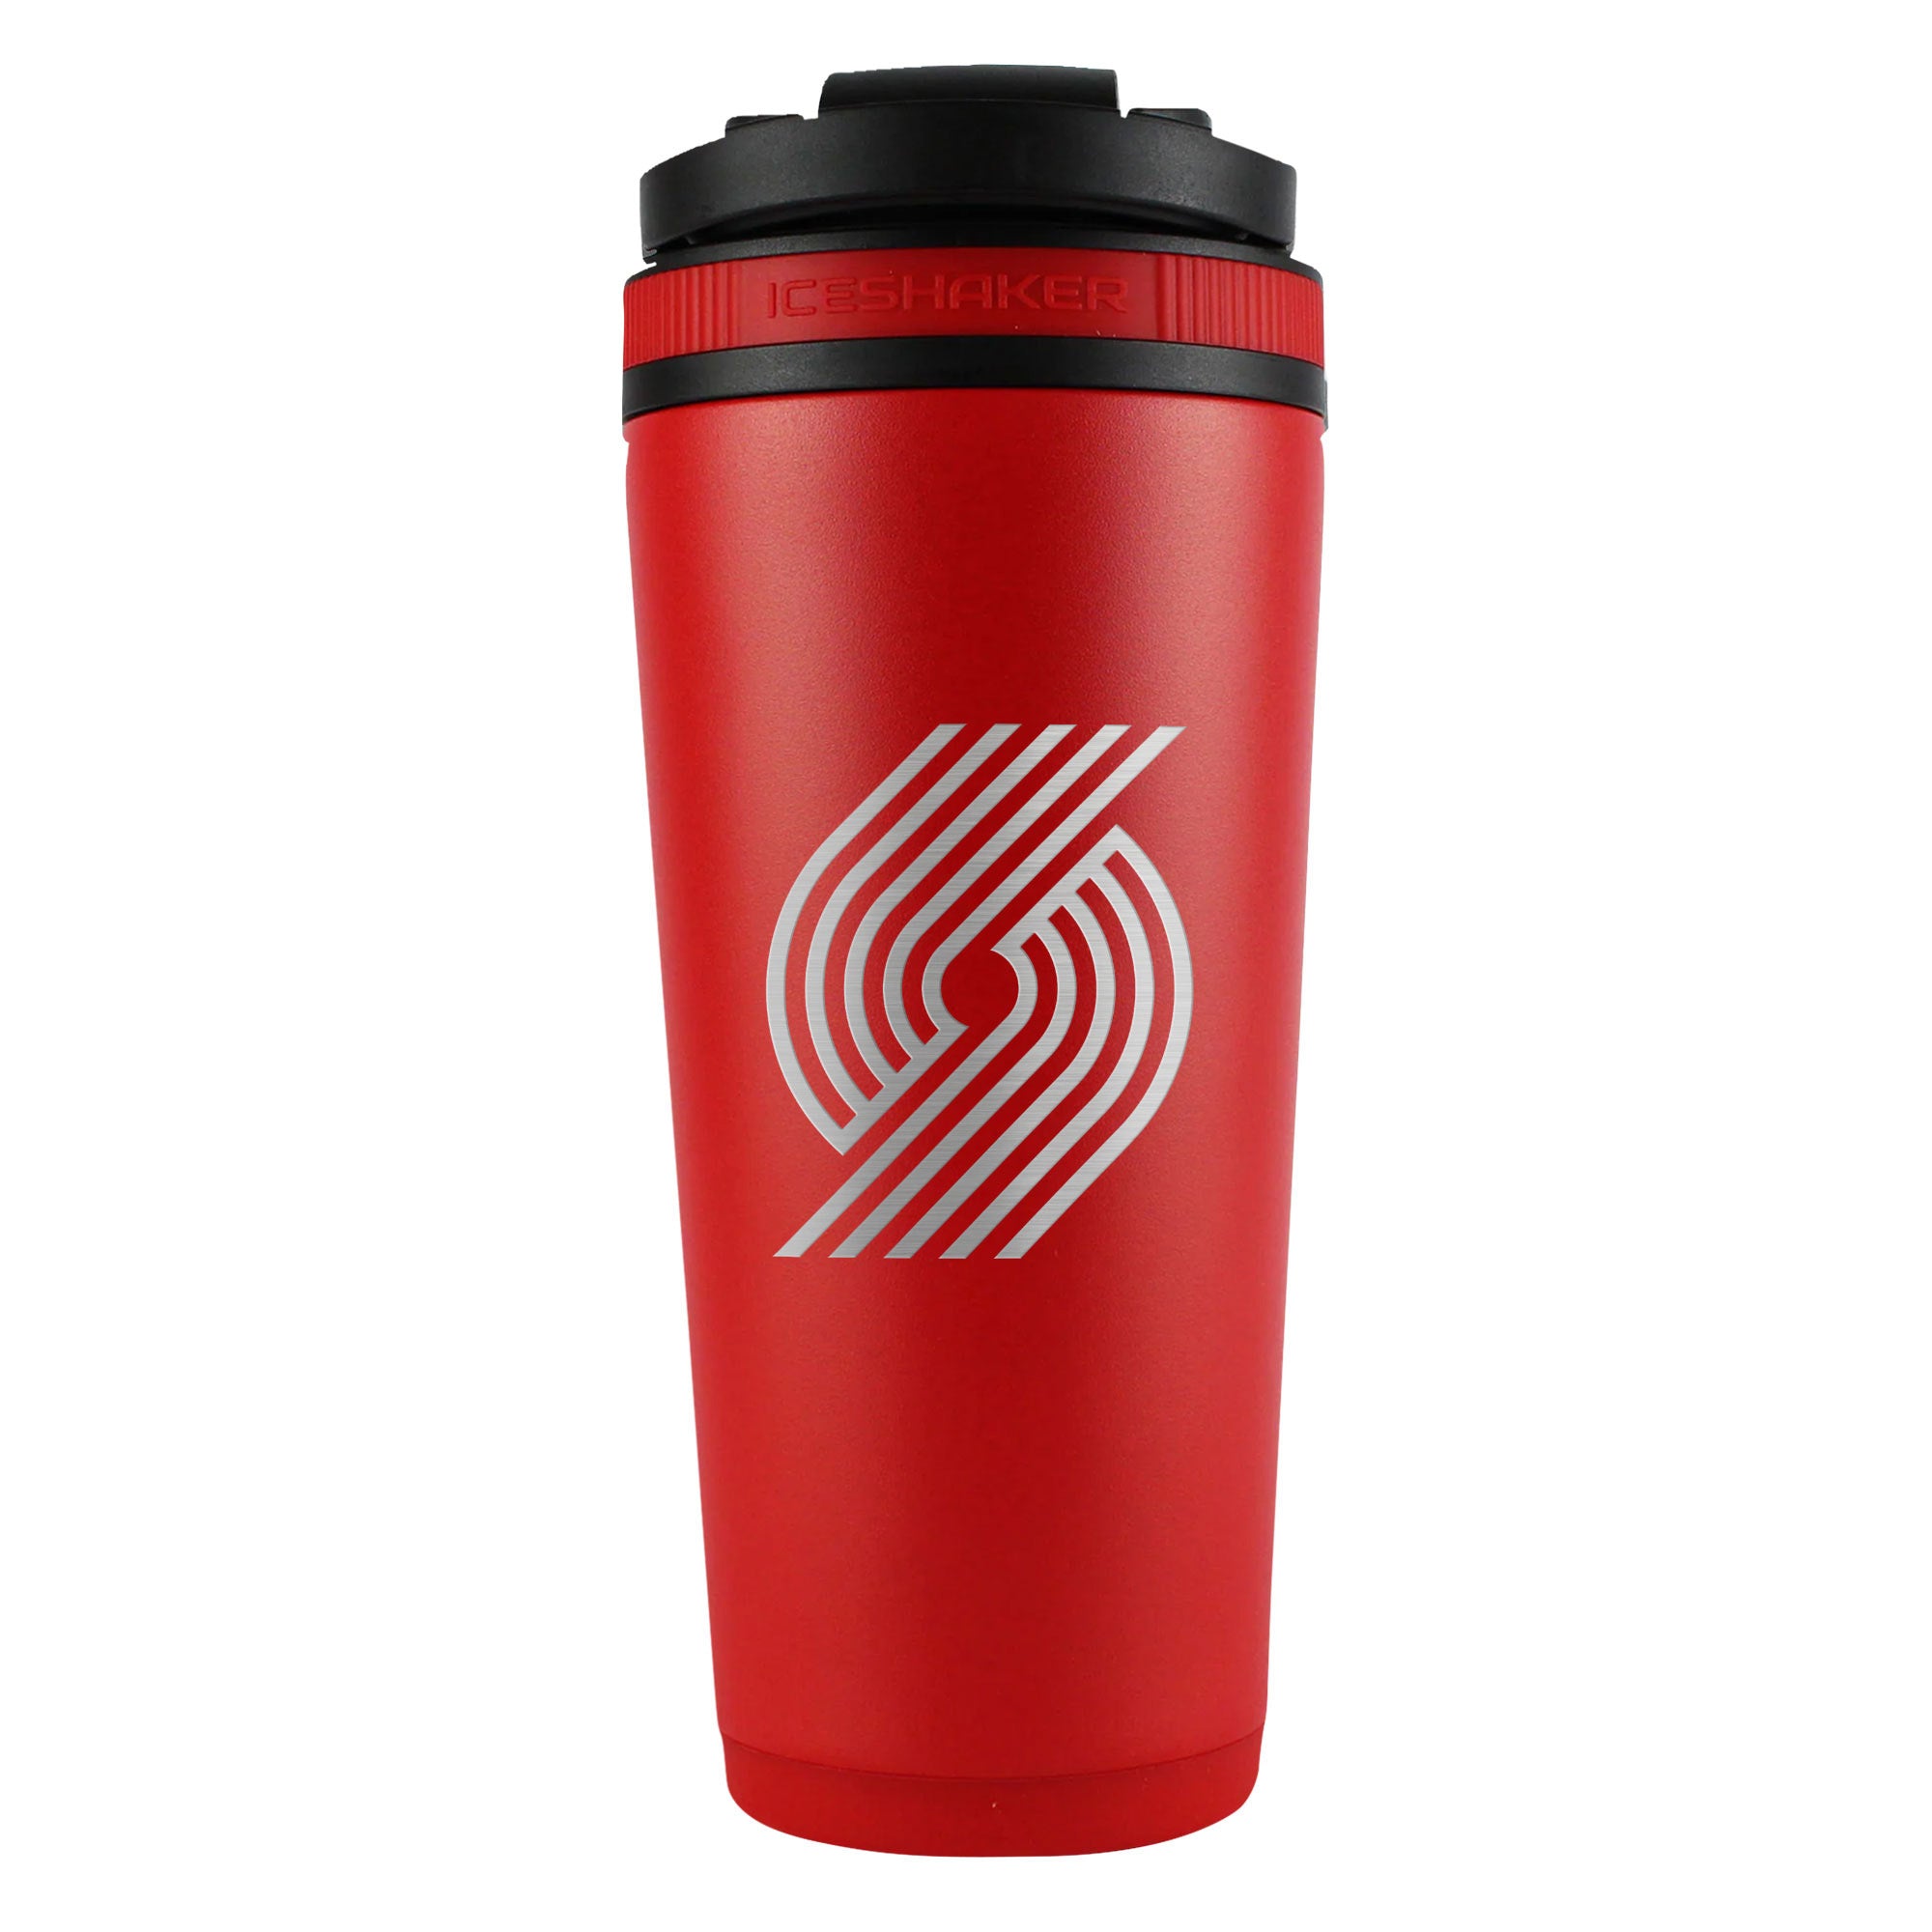 Officially Licensed Portland Trail Blazers 26oz Ice Shaker